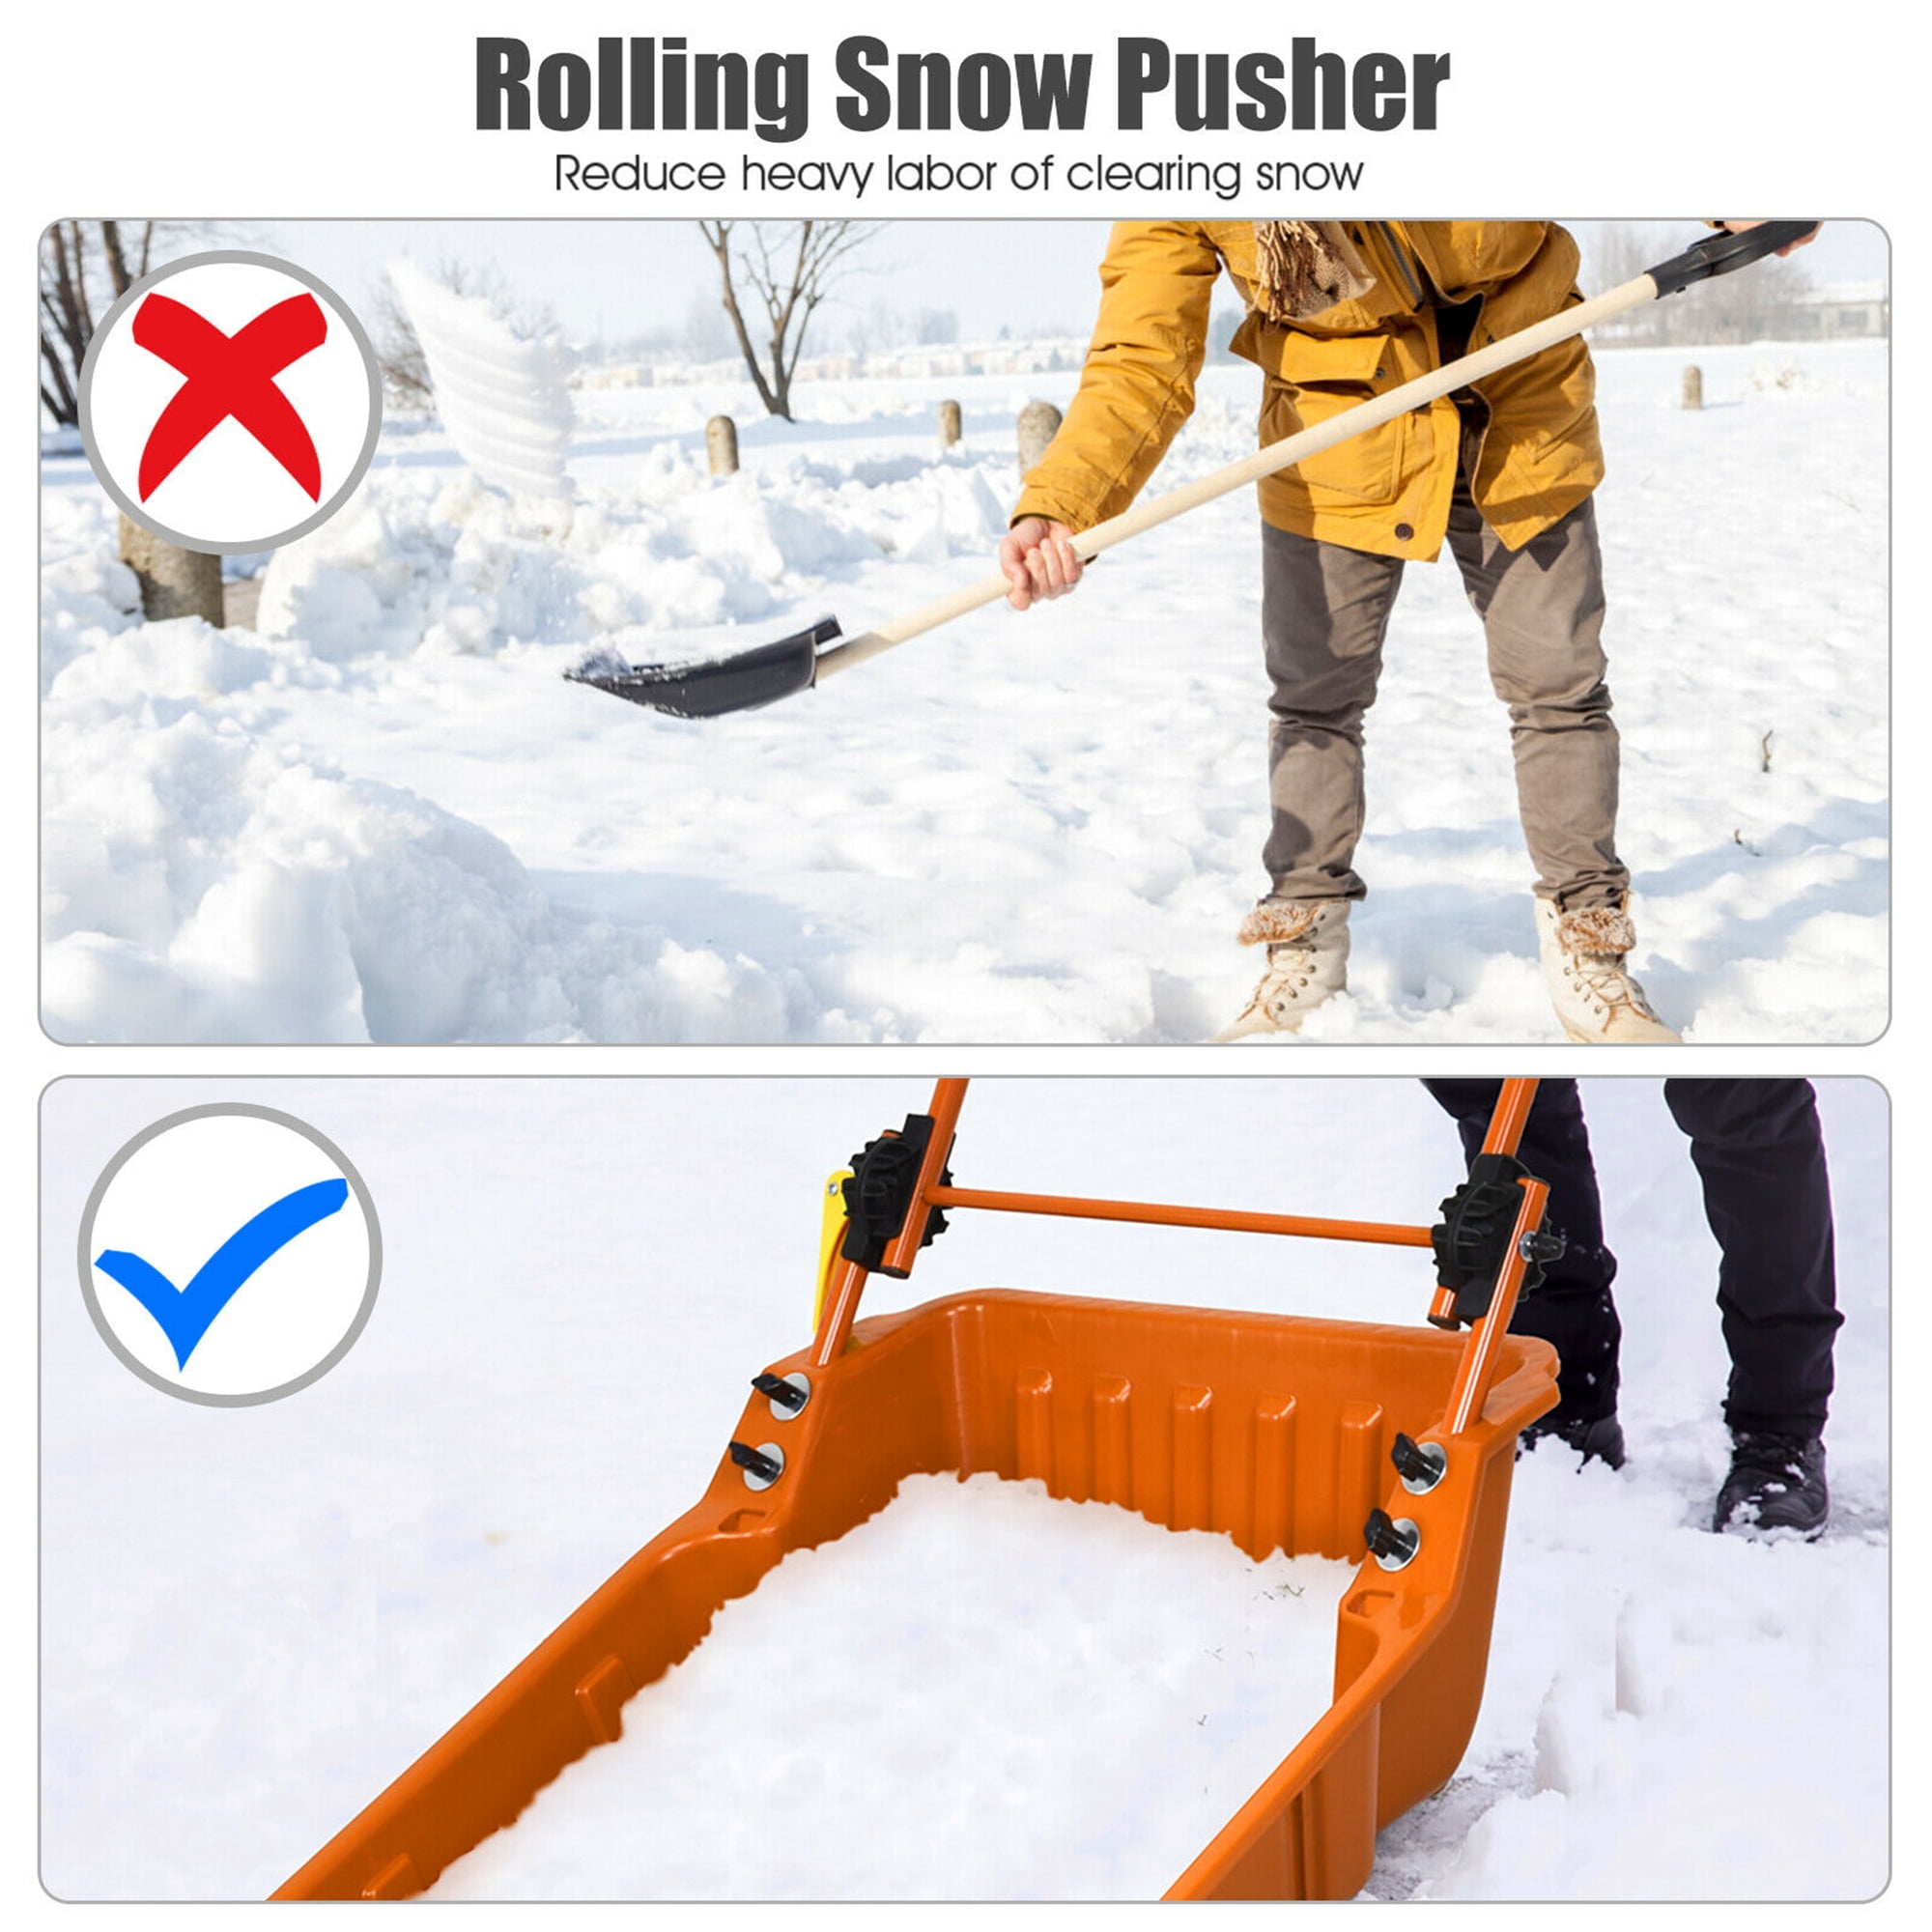 Adjustable Angle & Easy Setup Patio GYMAX 26” Poly Sleigh Shovel with Ergonomic Handle & Wheels for Driveway Rolling Snow Pusher Scoop Extra Large Capacity Black Sidewalk 